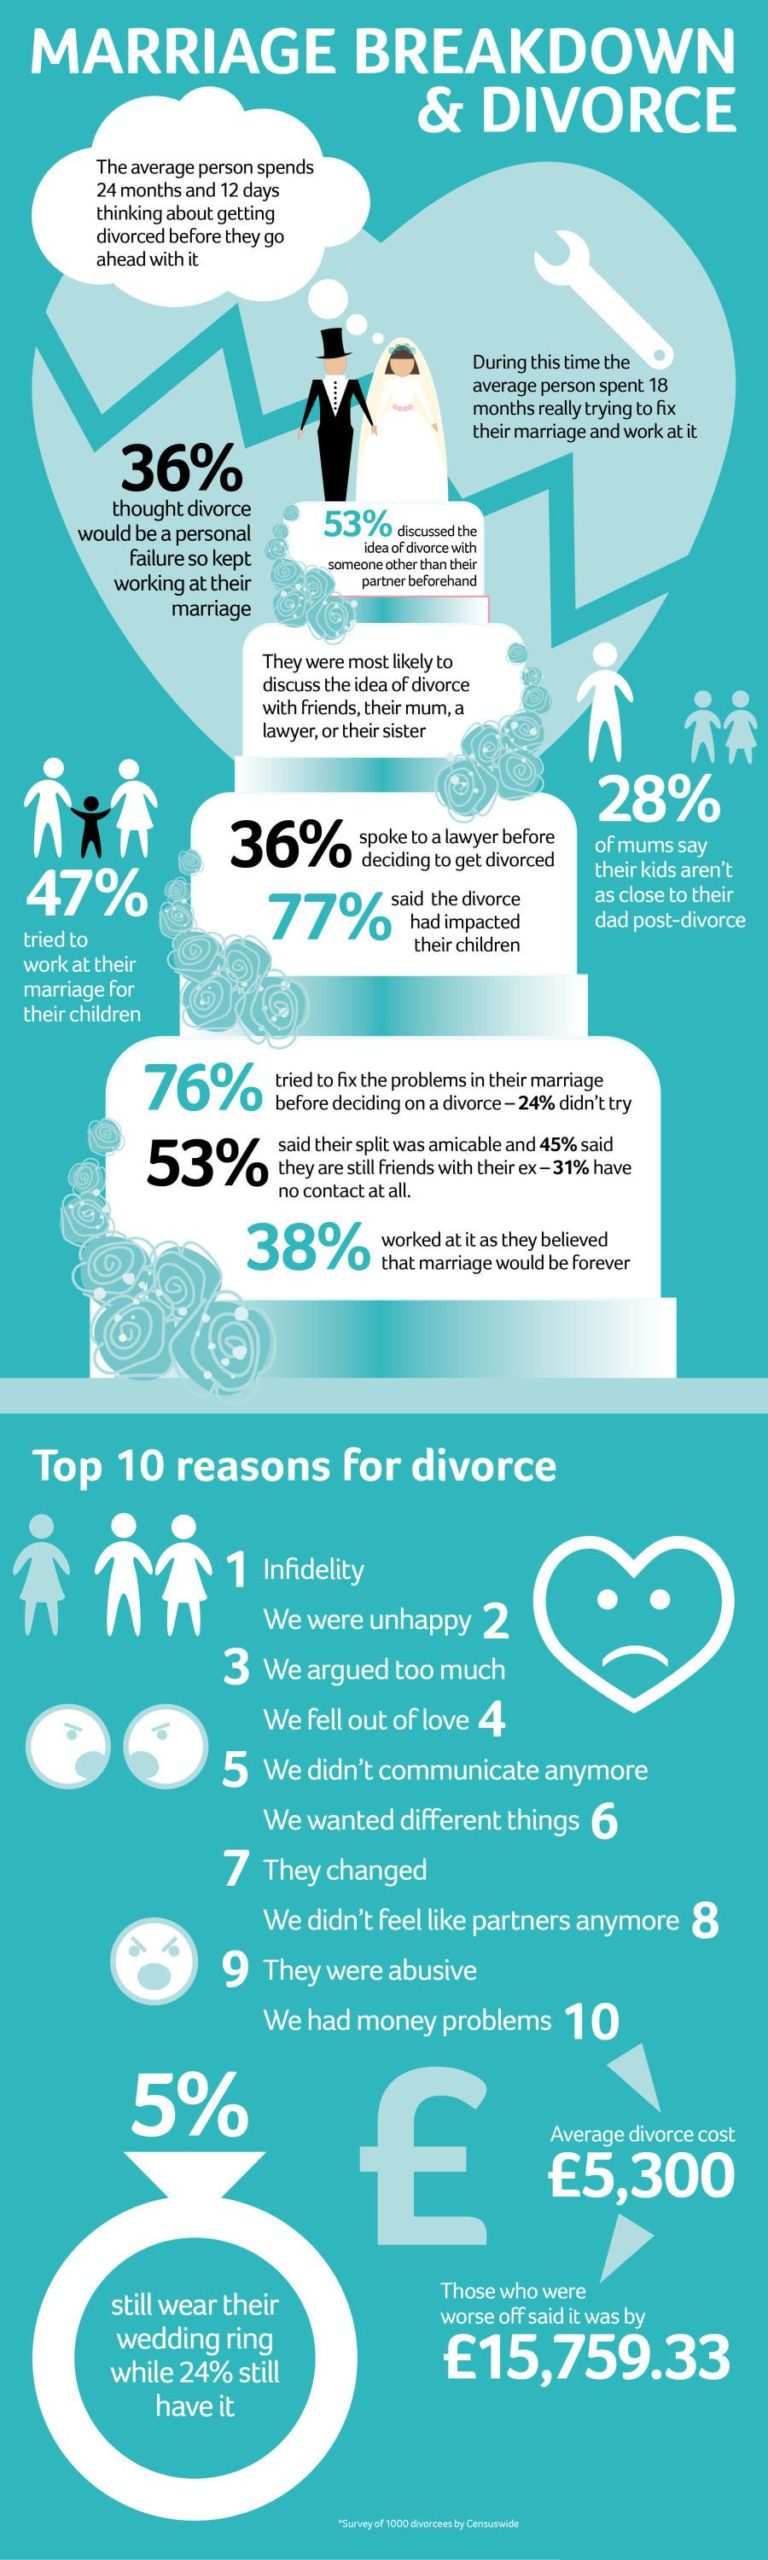 No Longer Happily Ever After? Here’s Why You Need a Divorce Lawyer